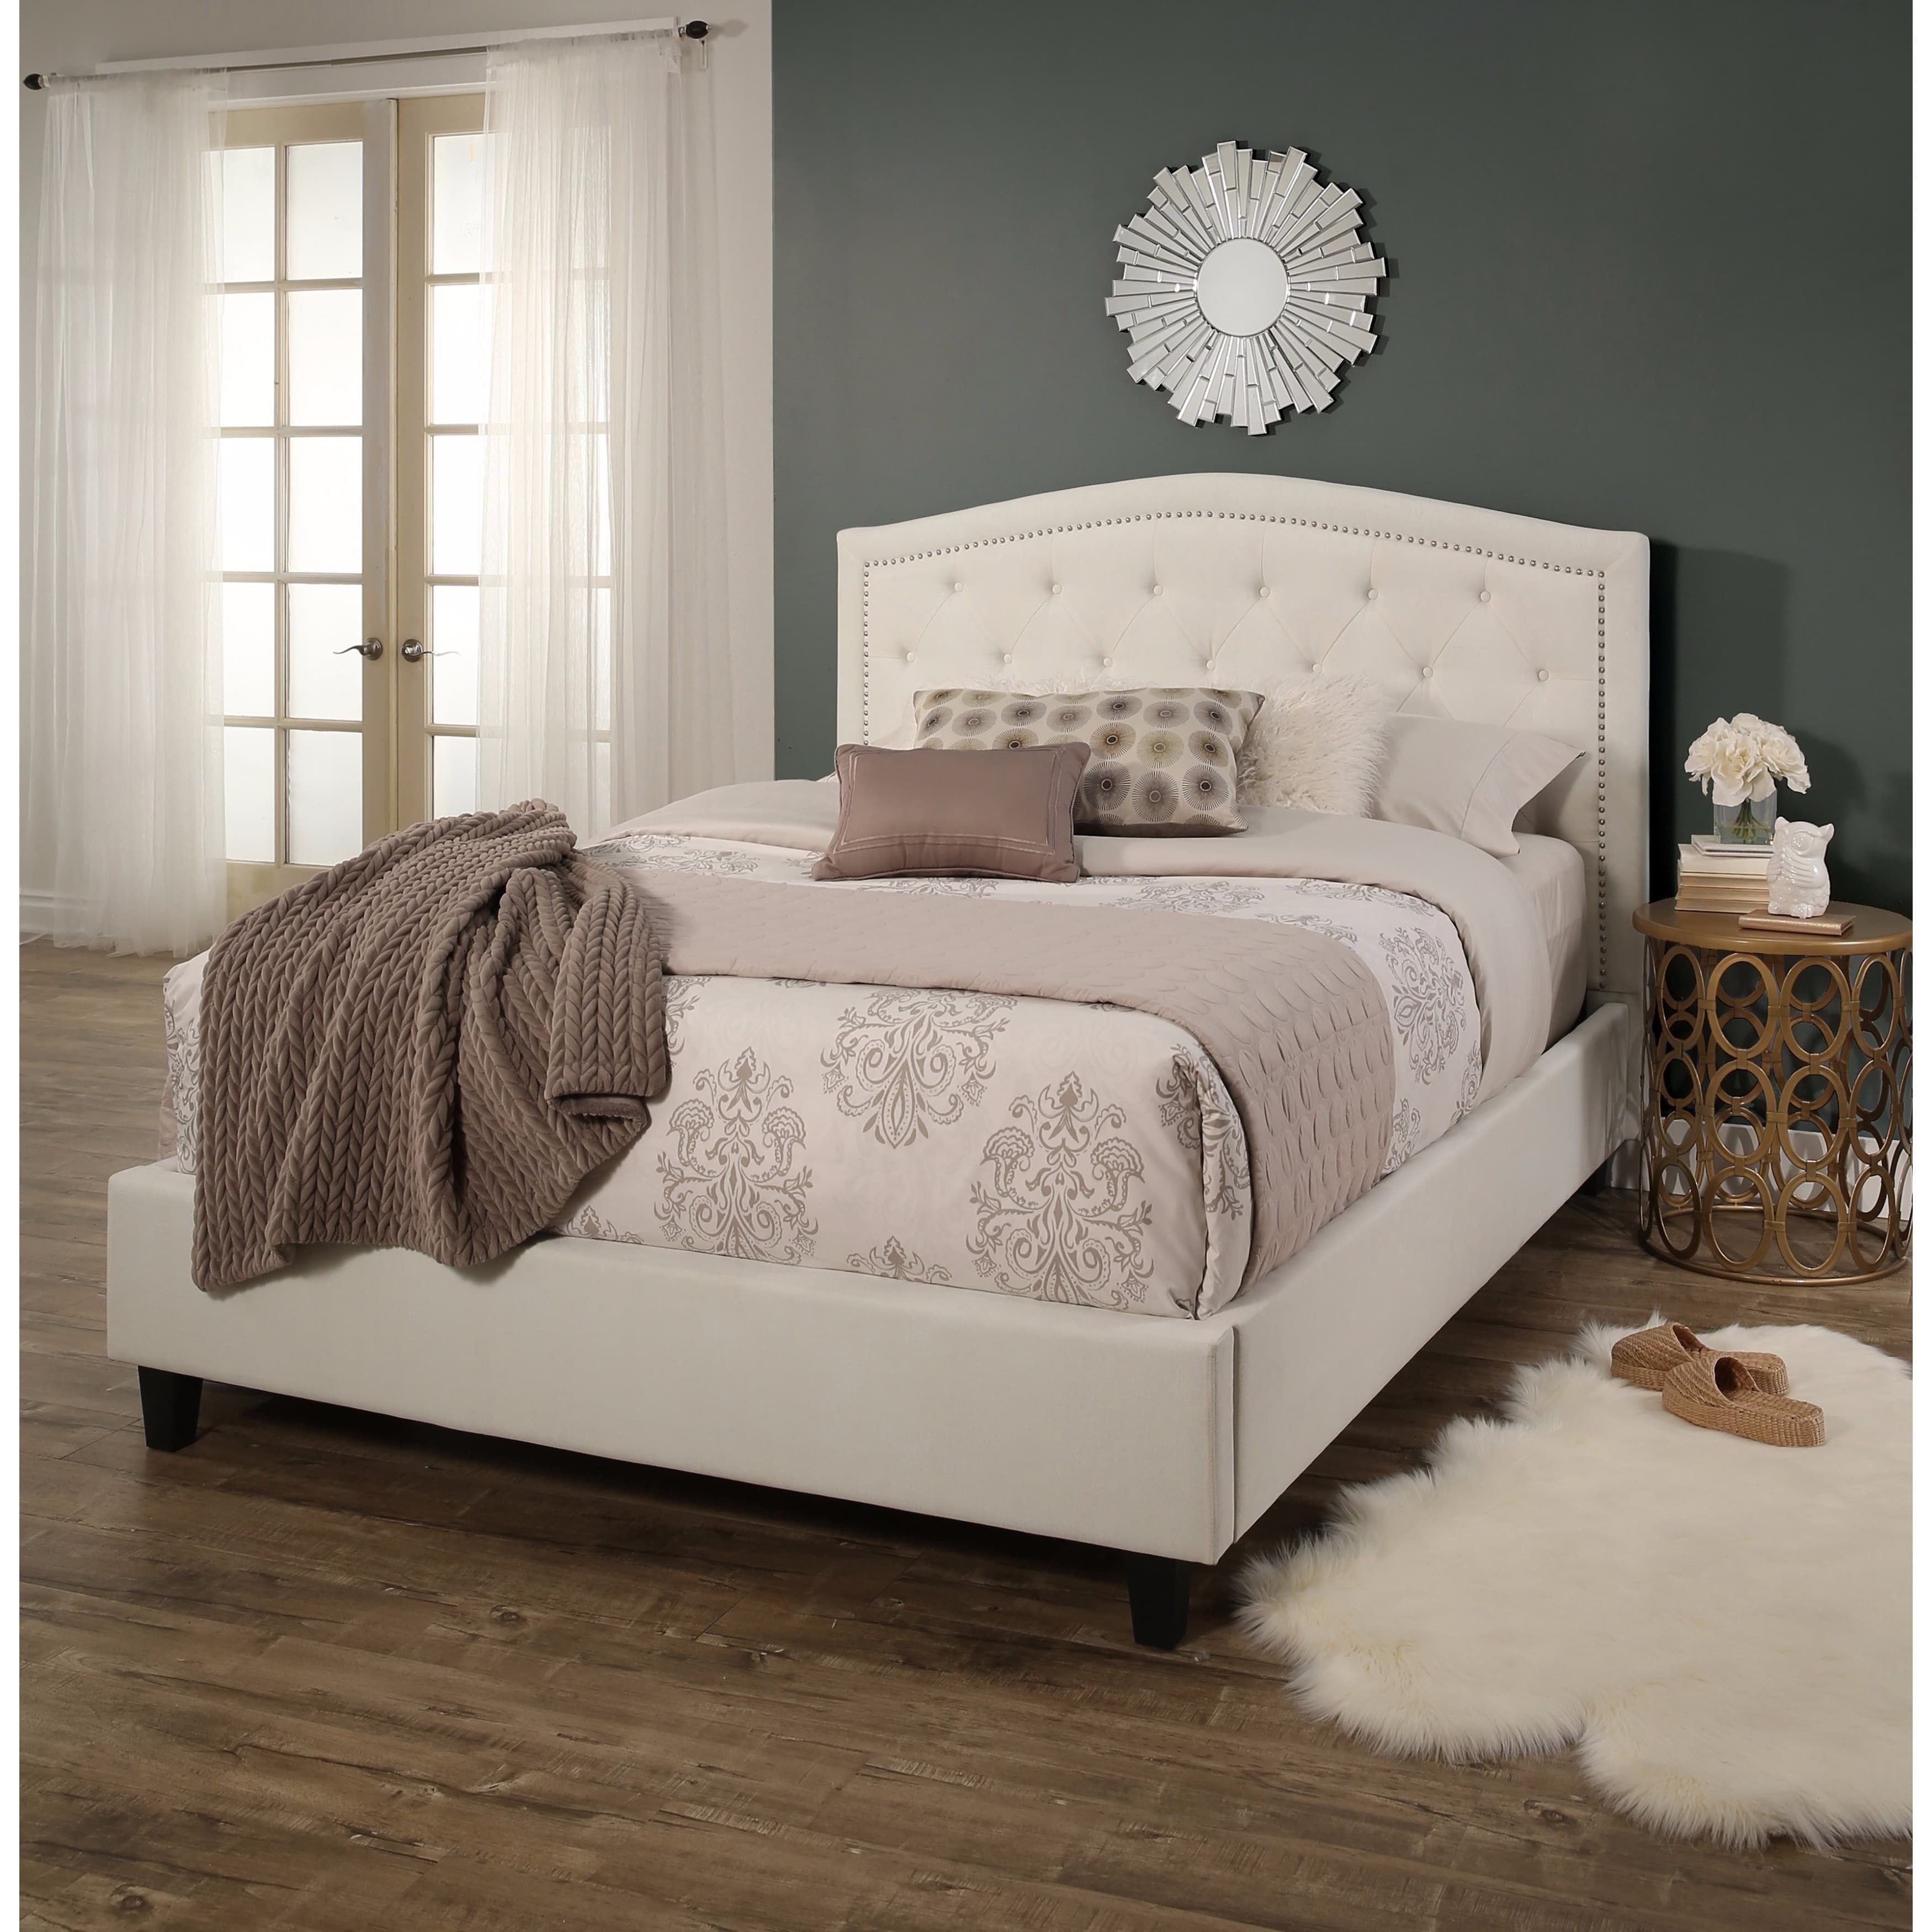 Best Deals On Bedroom Set Unique Virgil Upholstered Tufted Queen Bed by Christopher Knight